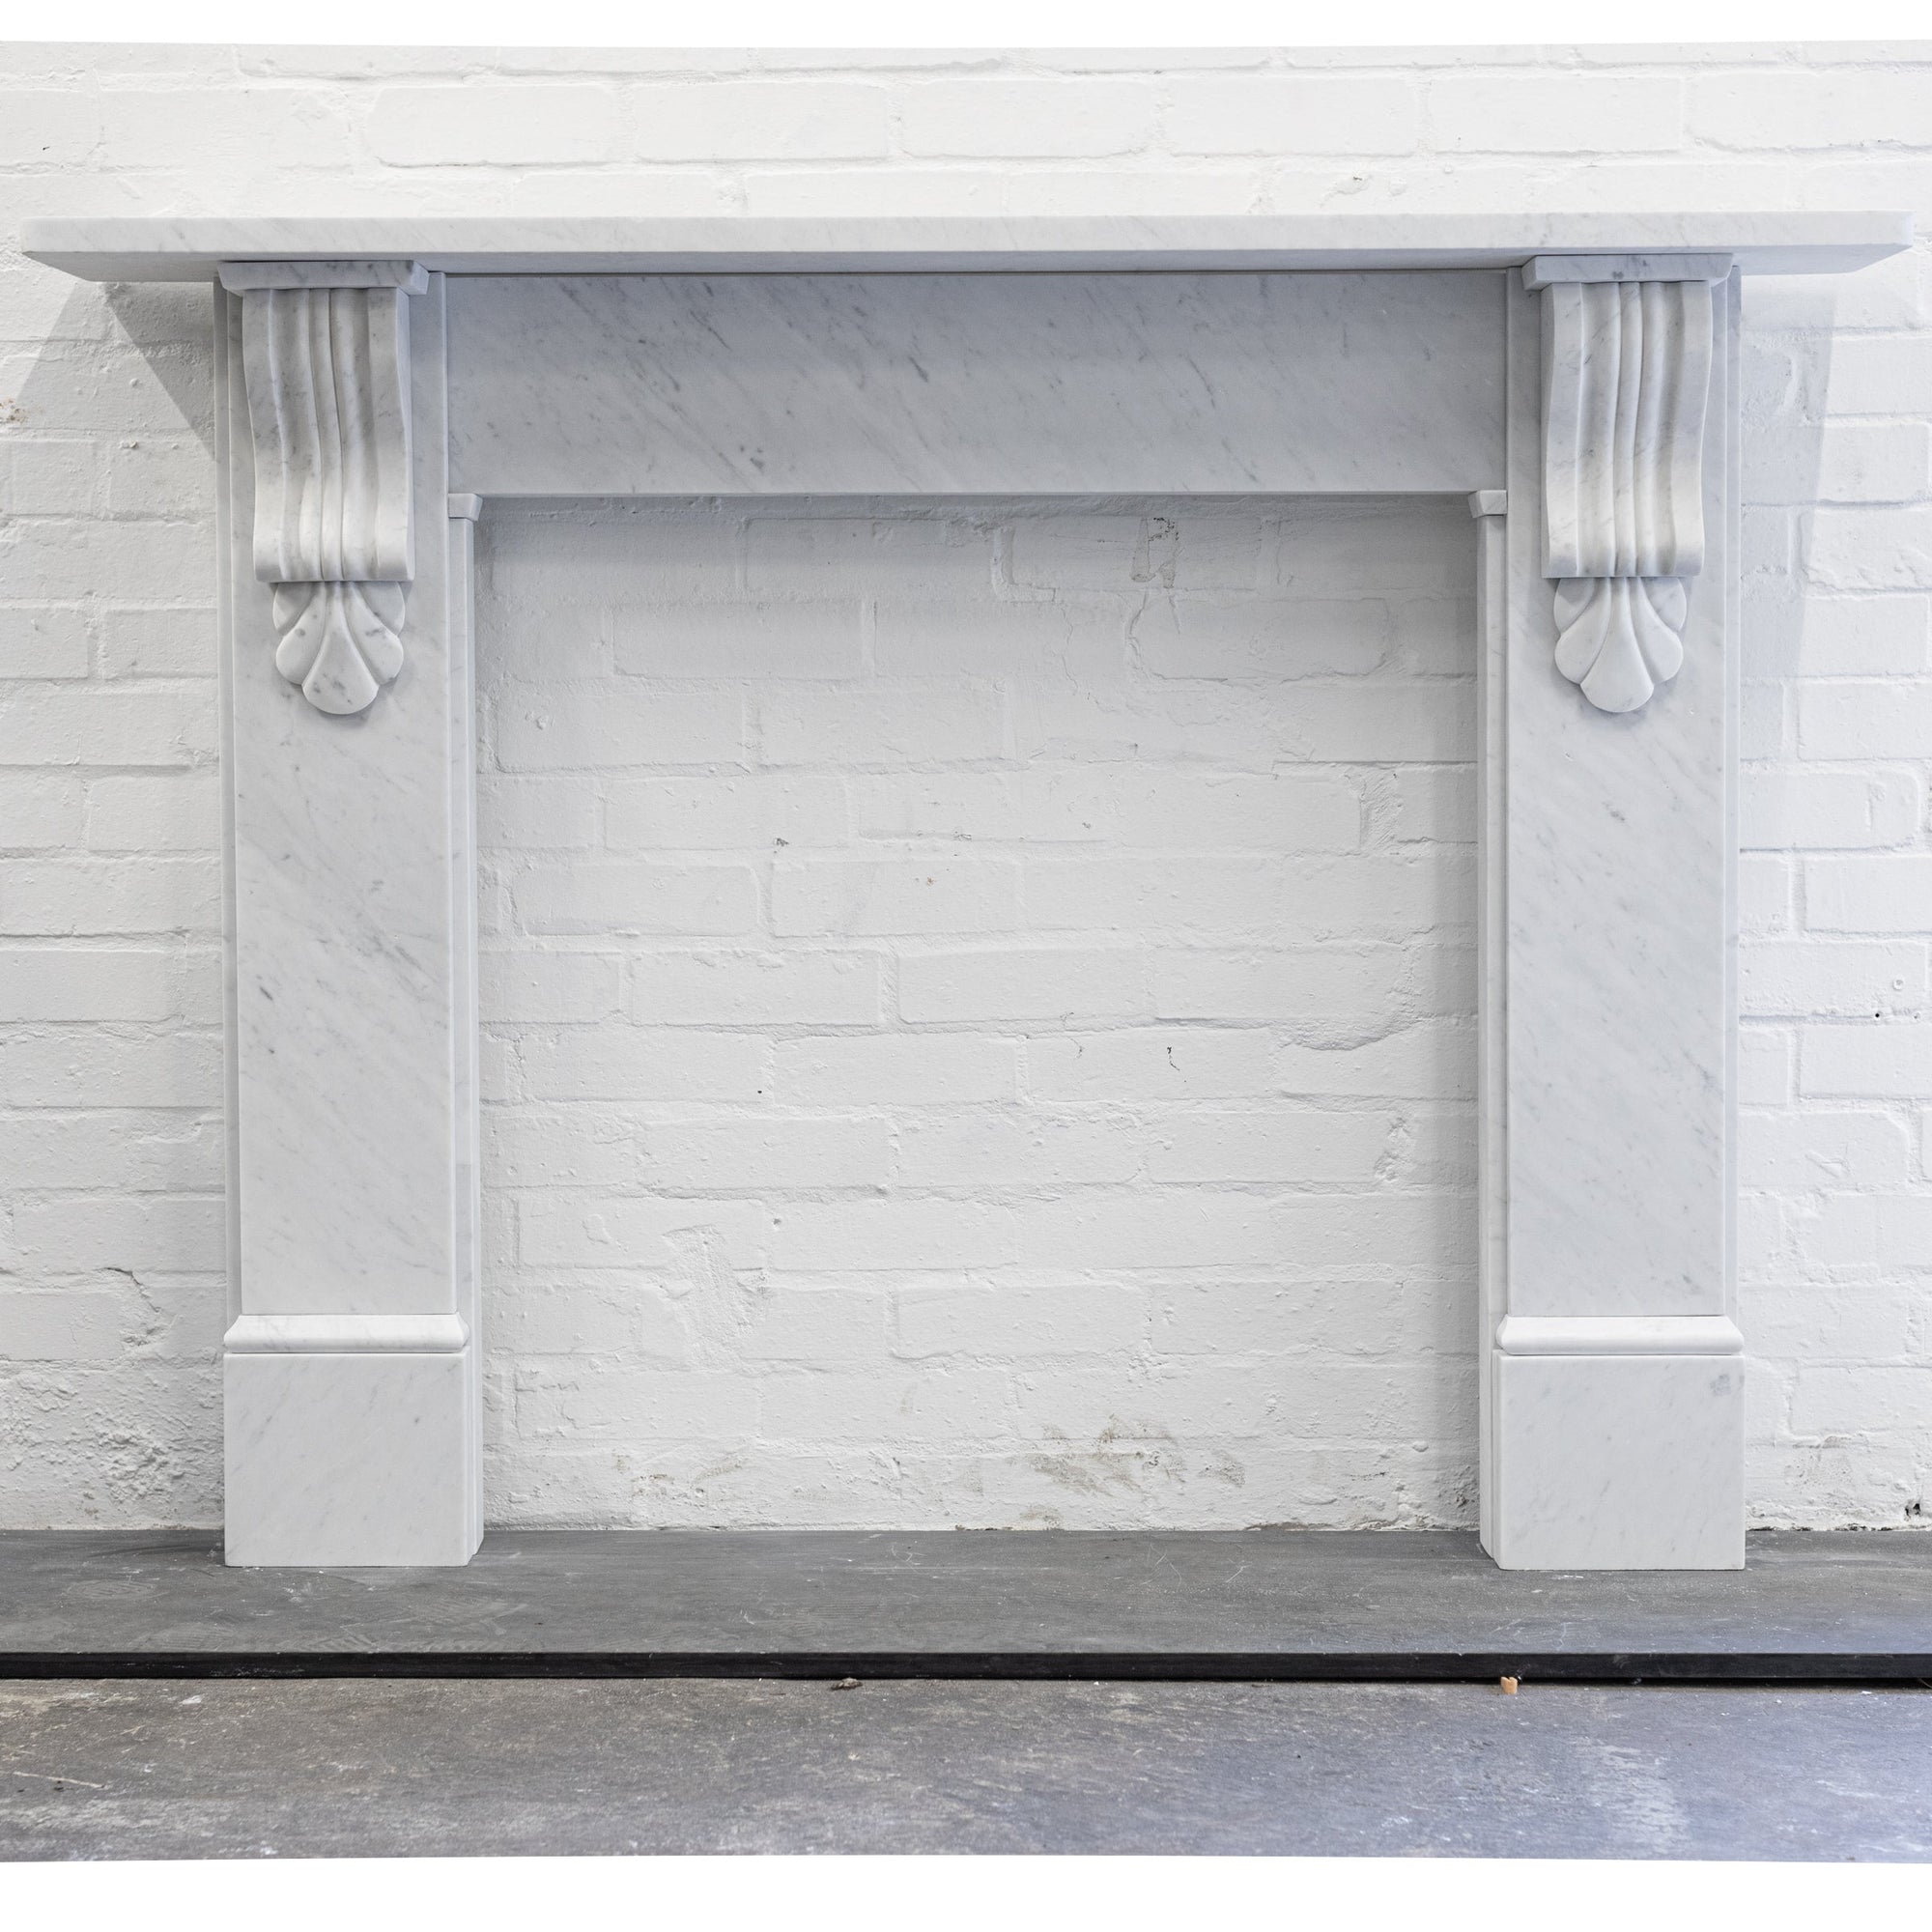 Victorian Style Surround With Corbels | Reclaimed Carrara Marble | Standard Size | The Architectural Forum